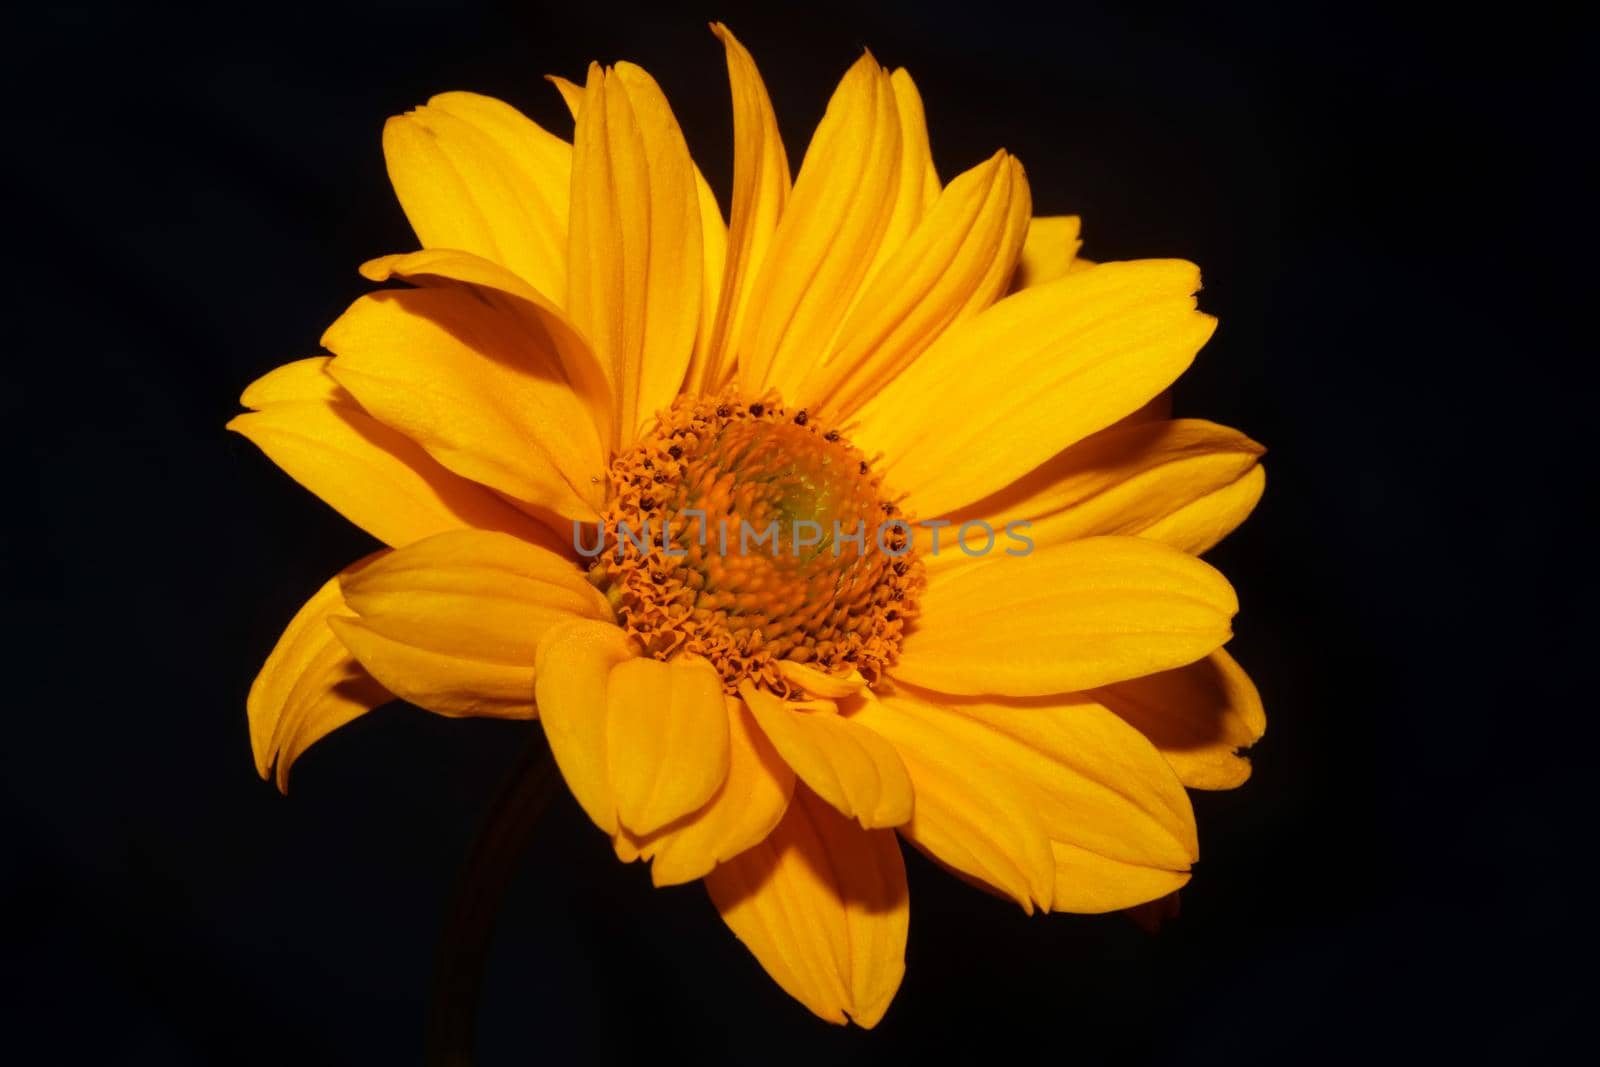 Yellow flower blossom close up botanical background heliopsis helianthoides family compositae big size metal prints high quality nature pictures by BakalaeroZz